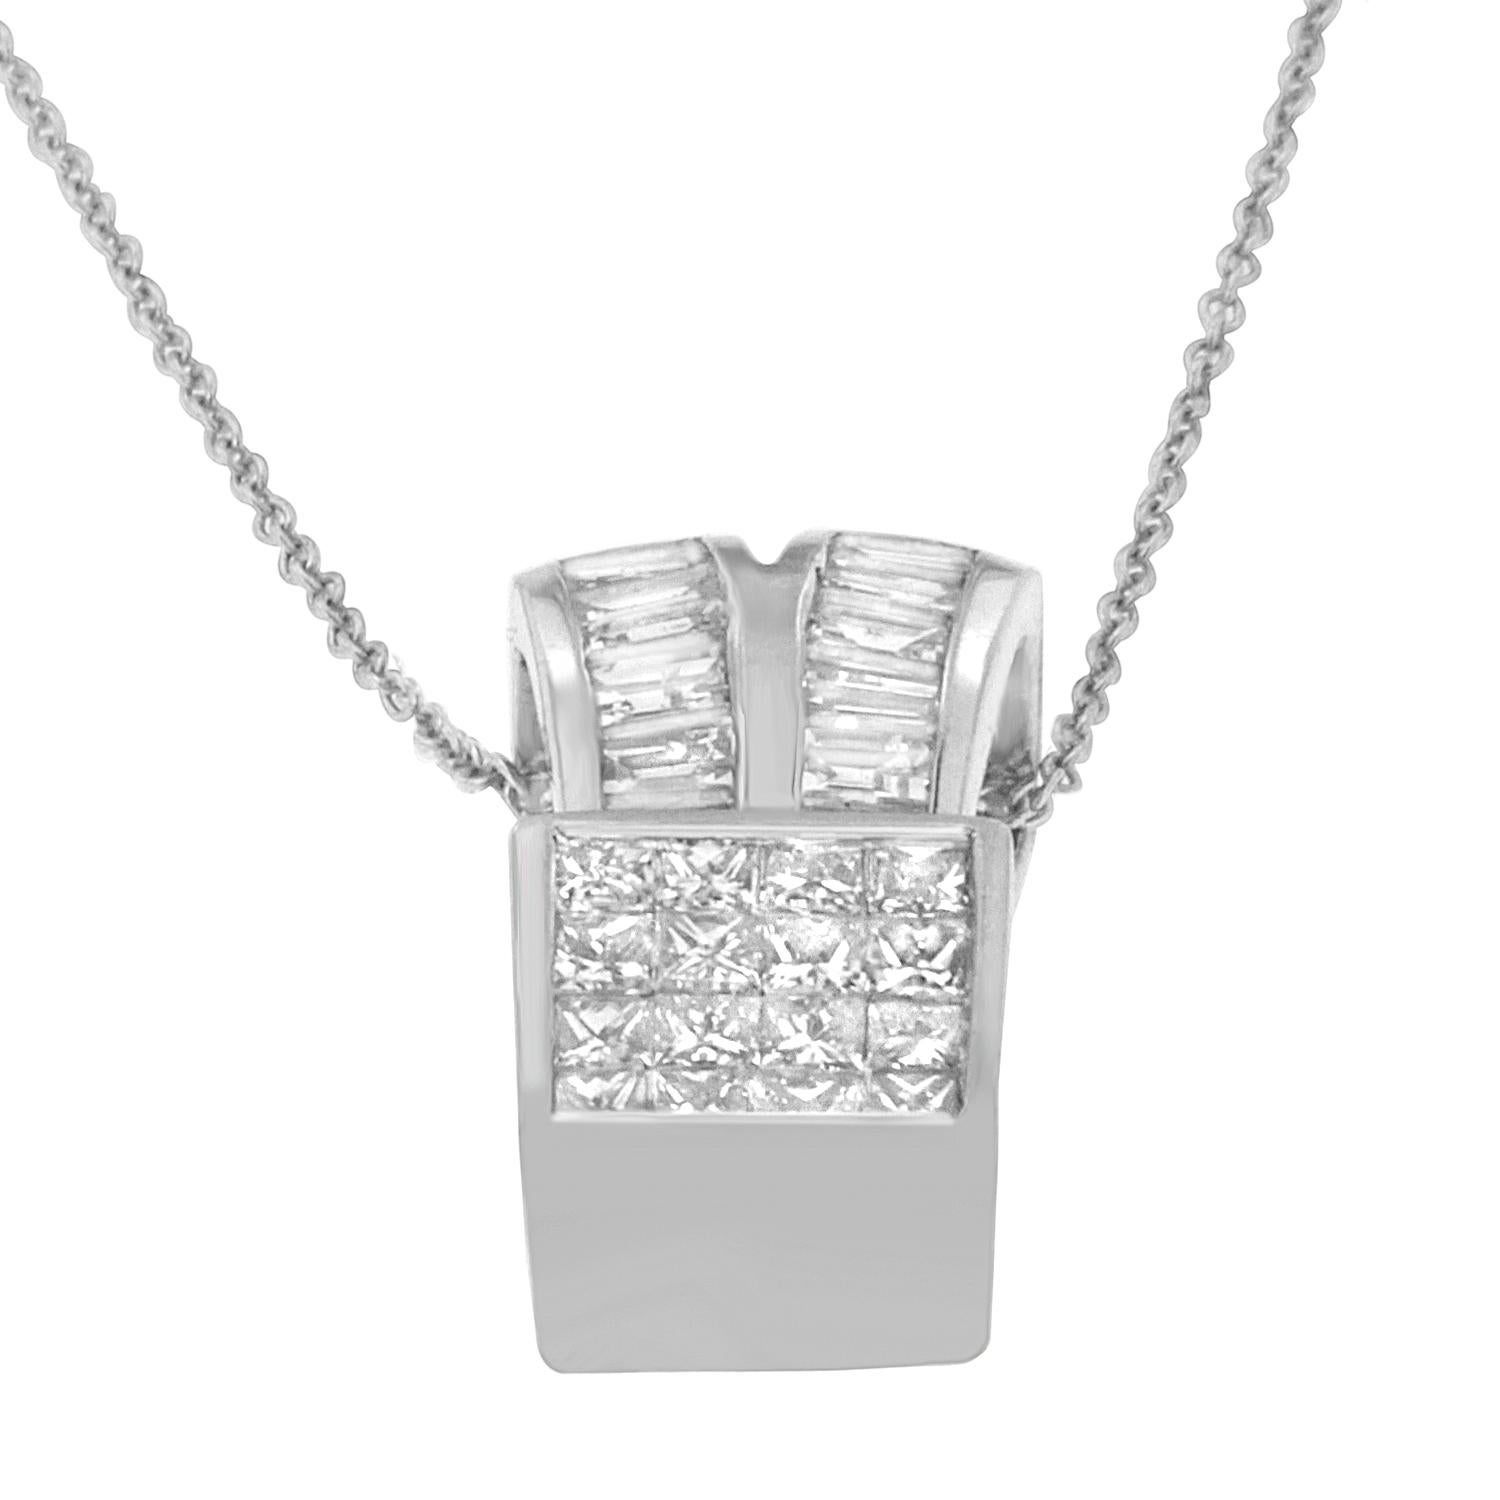 Celebrate her birthday, anniversary or your love of her every day with this gorgeous pendant. Princess cut diamonds bound by 14k white gold are crowned with channel set baguettes in a perfect double loop. This beautiful necklace includes 18” box